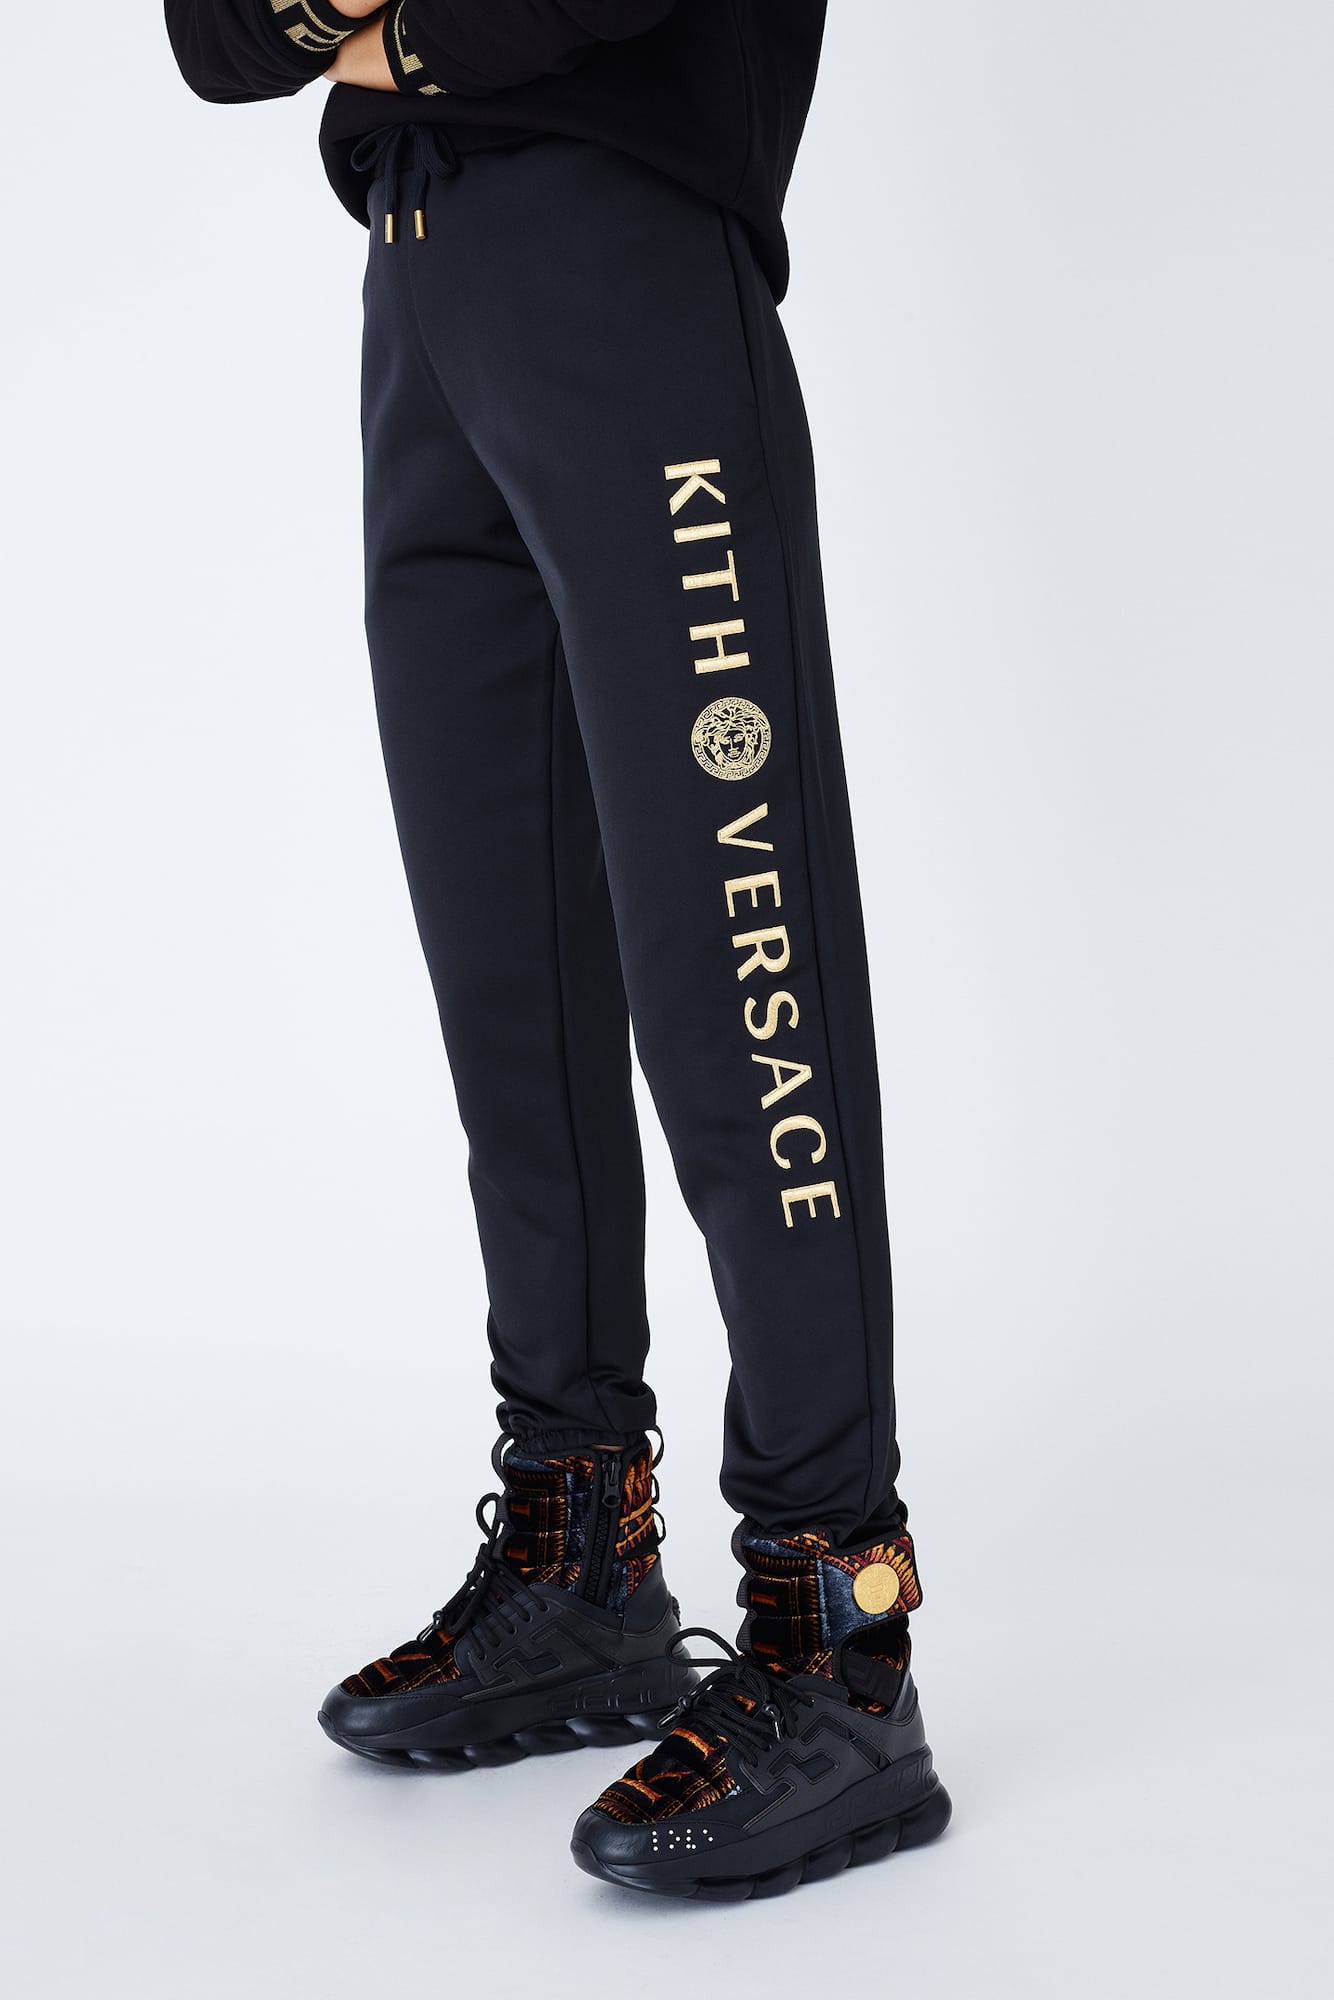 kith versace release date